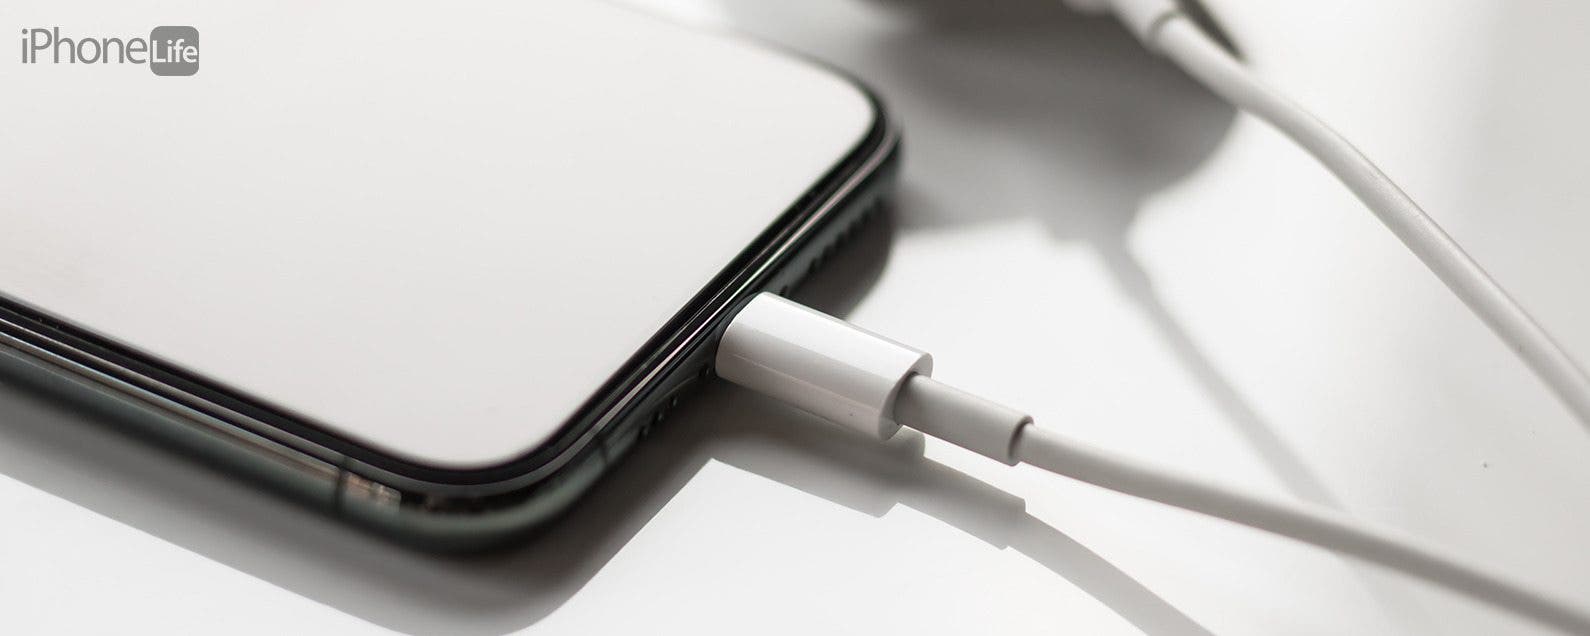 Is It Safe To Charge Your iPhone With Macbook Charger?